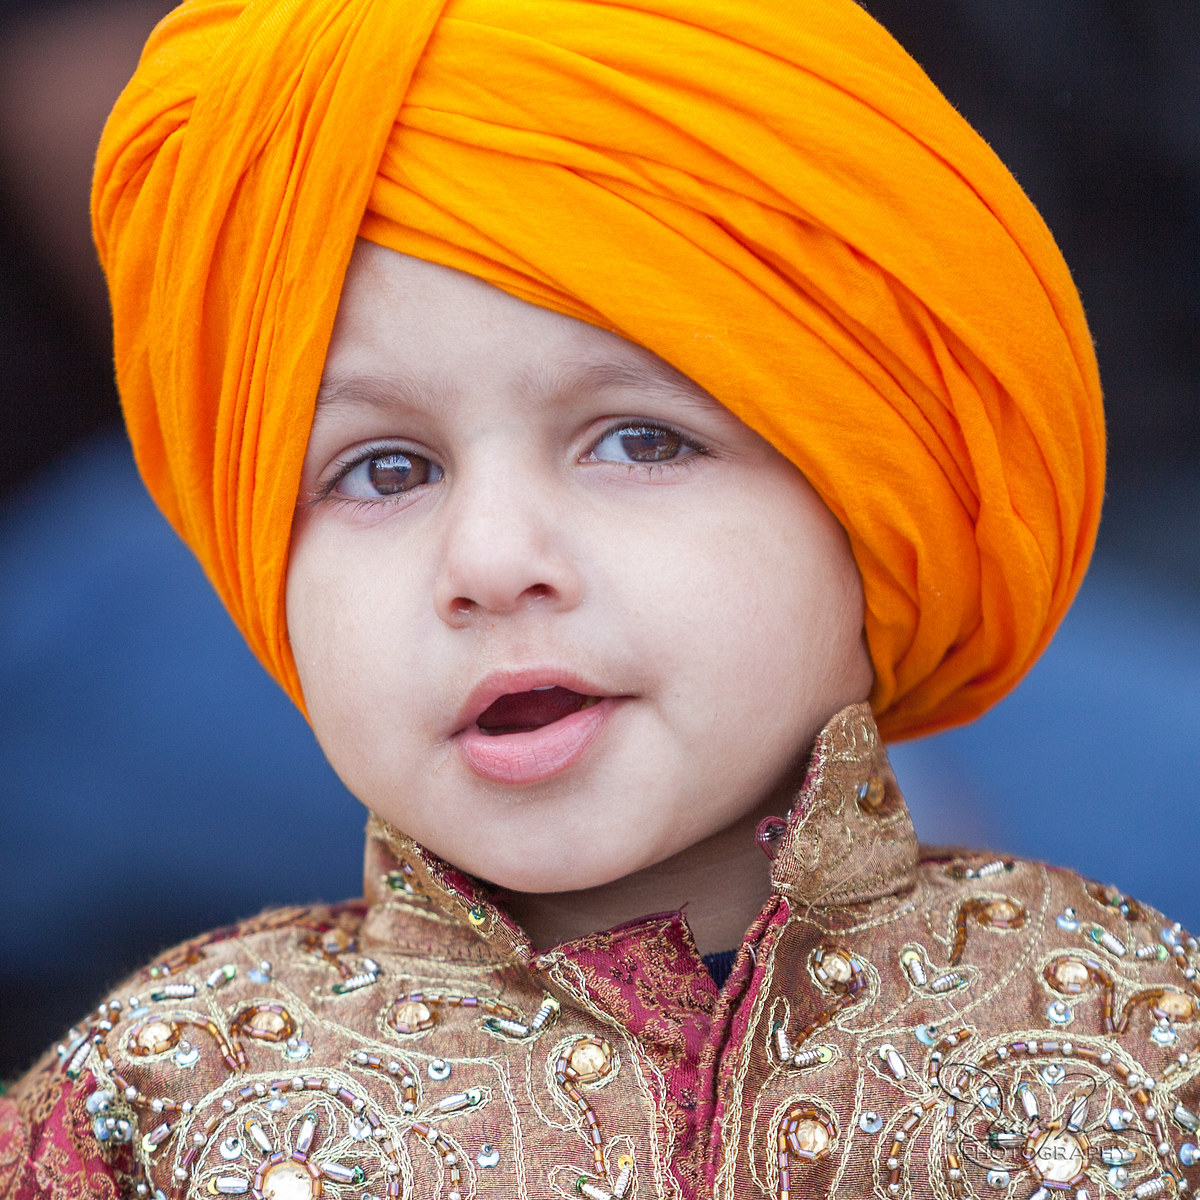 These are some of the shots I took of the boys and girls who performed Sikh dances at the...